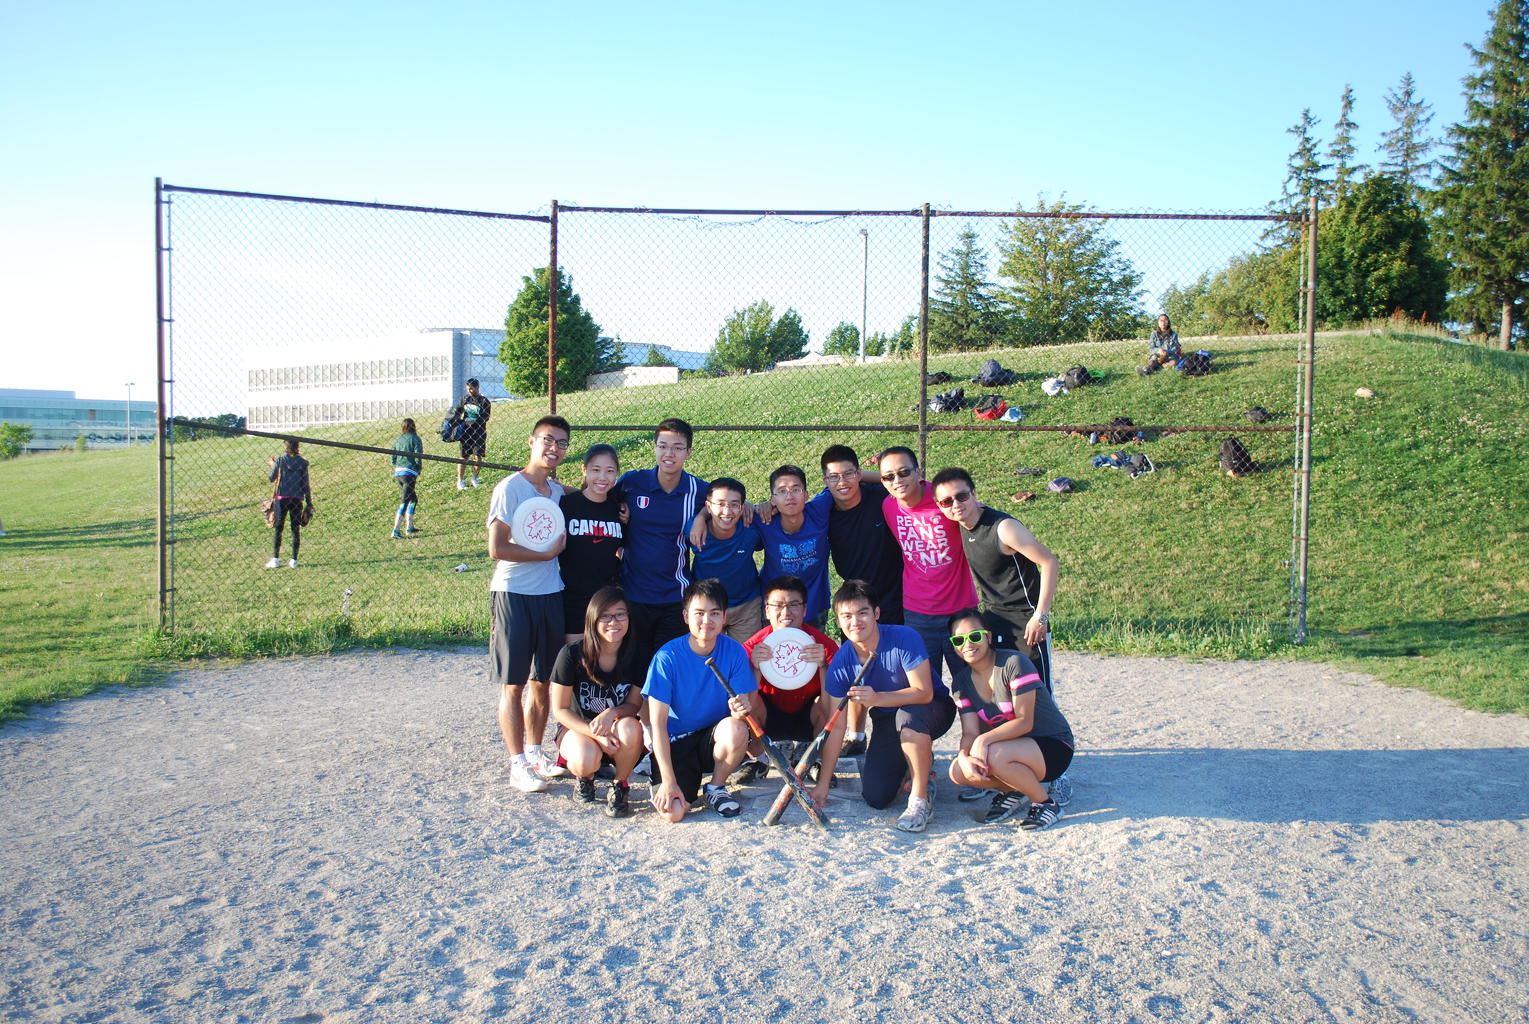 Intramural softball team picture